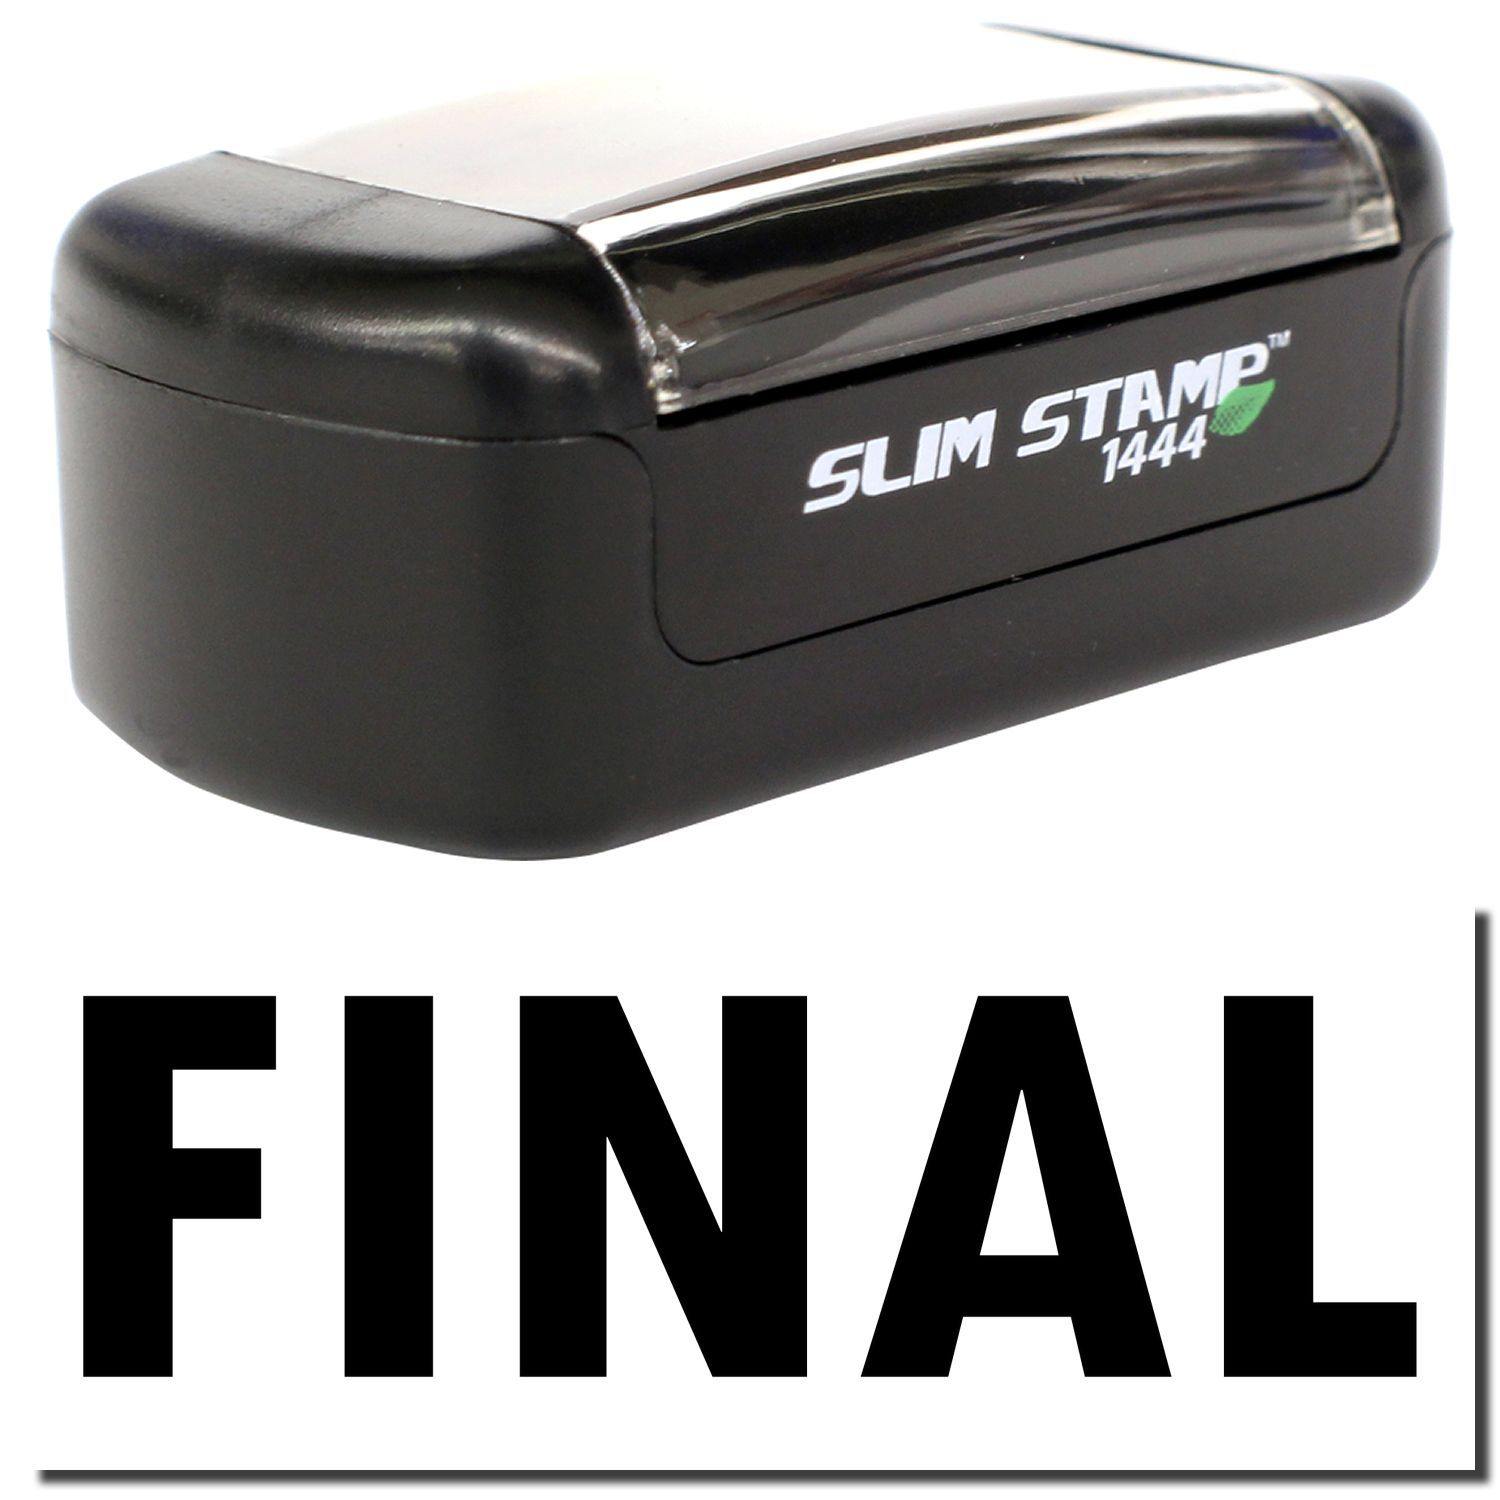 A stock office pre-inked stamp with a stamped image showing how the text "FINAL" is displayed after stamping.